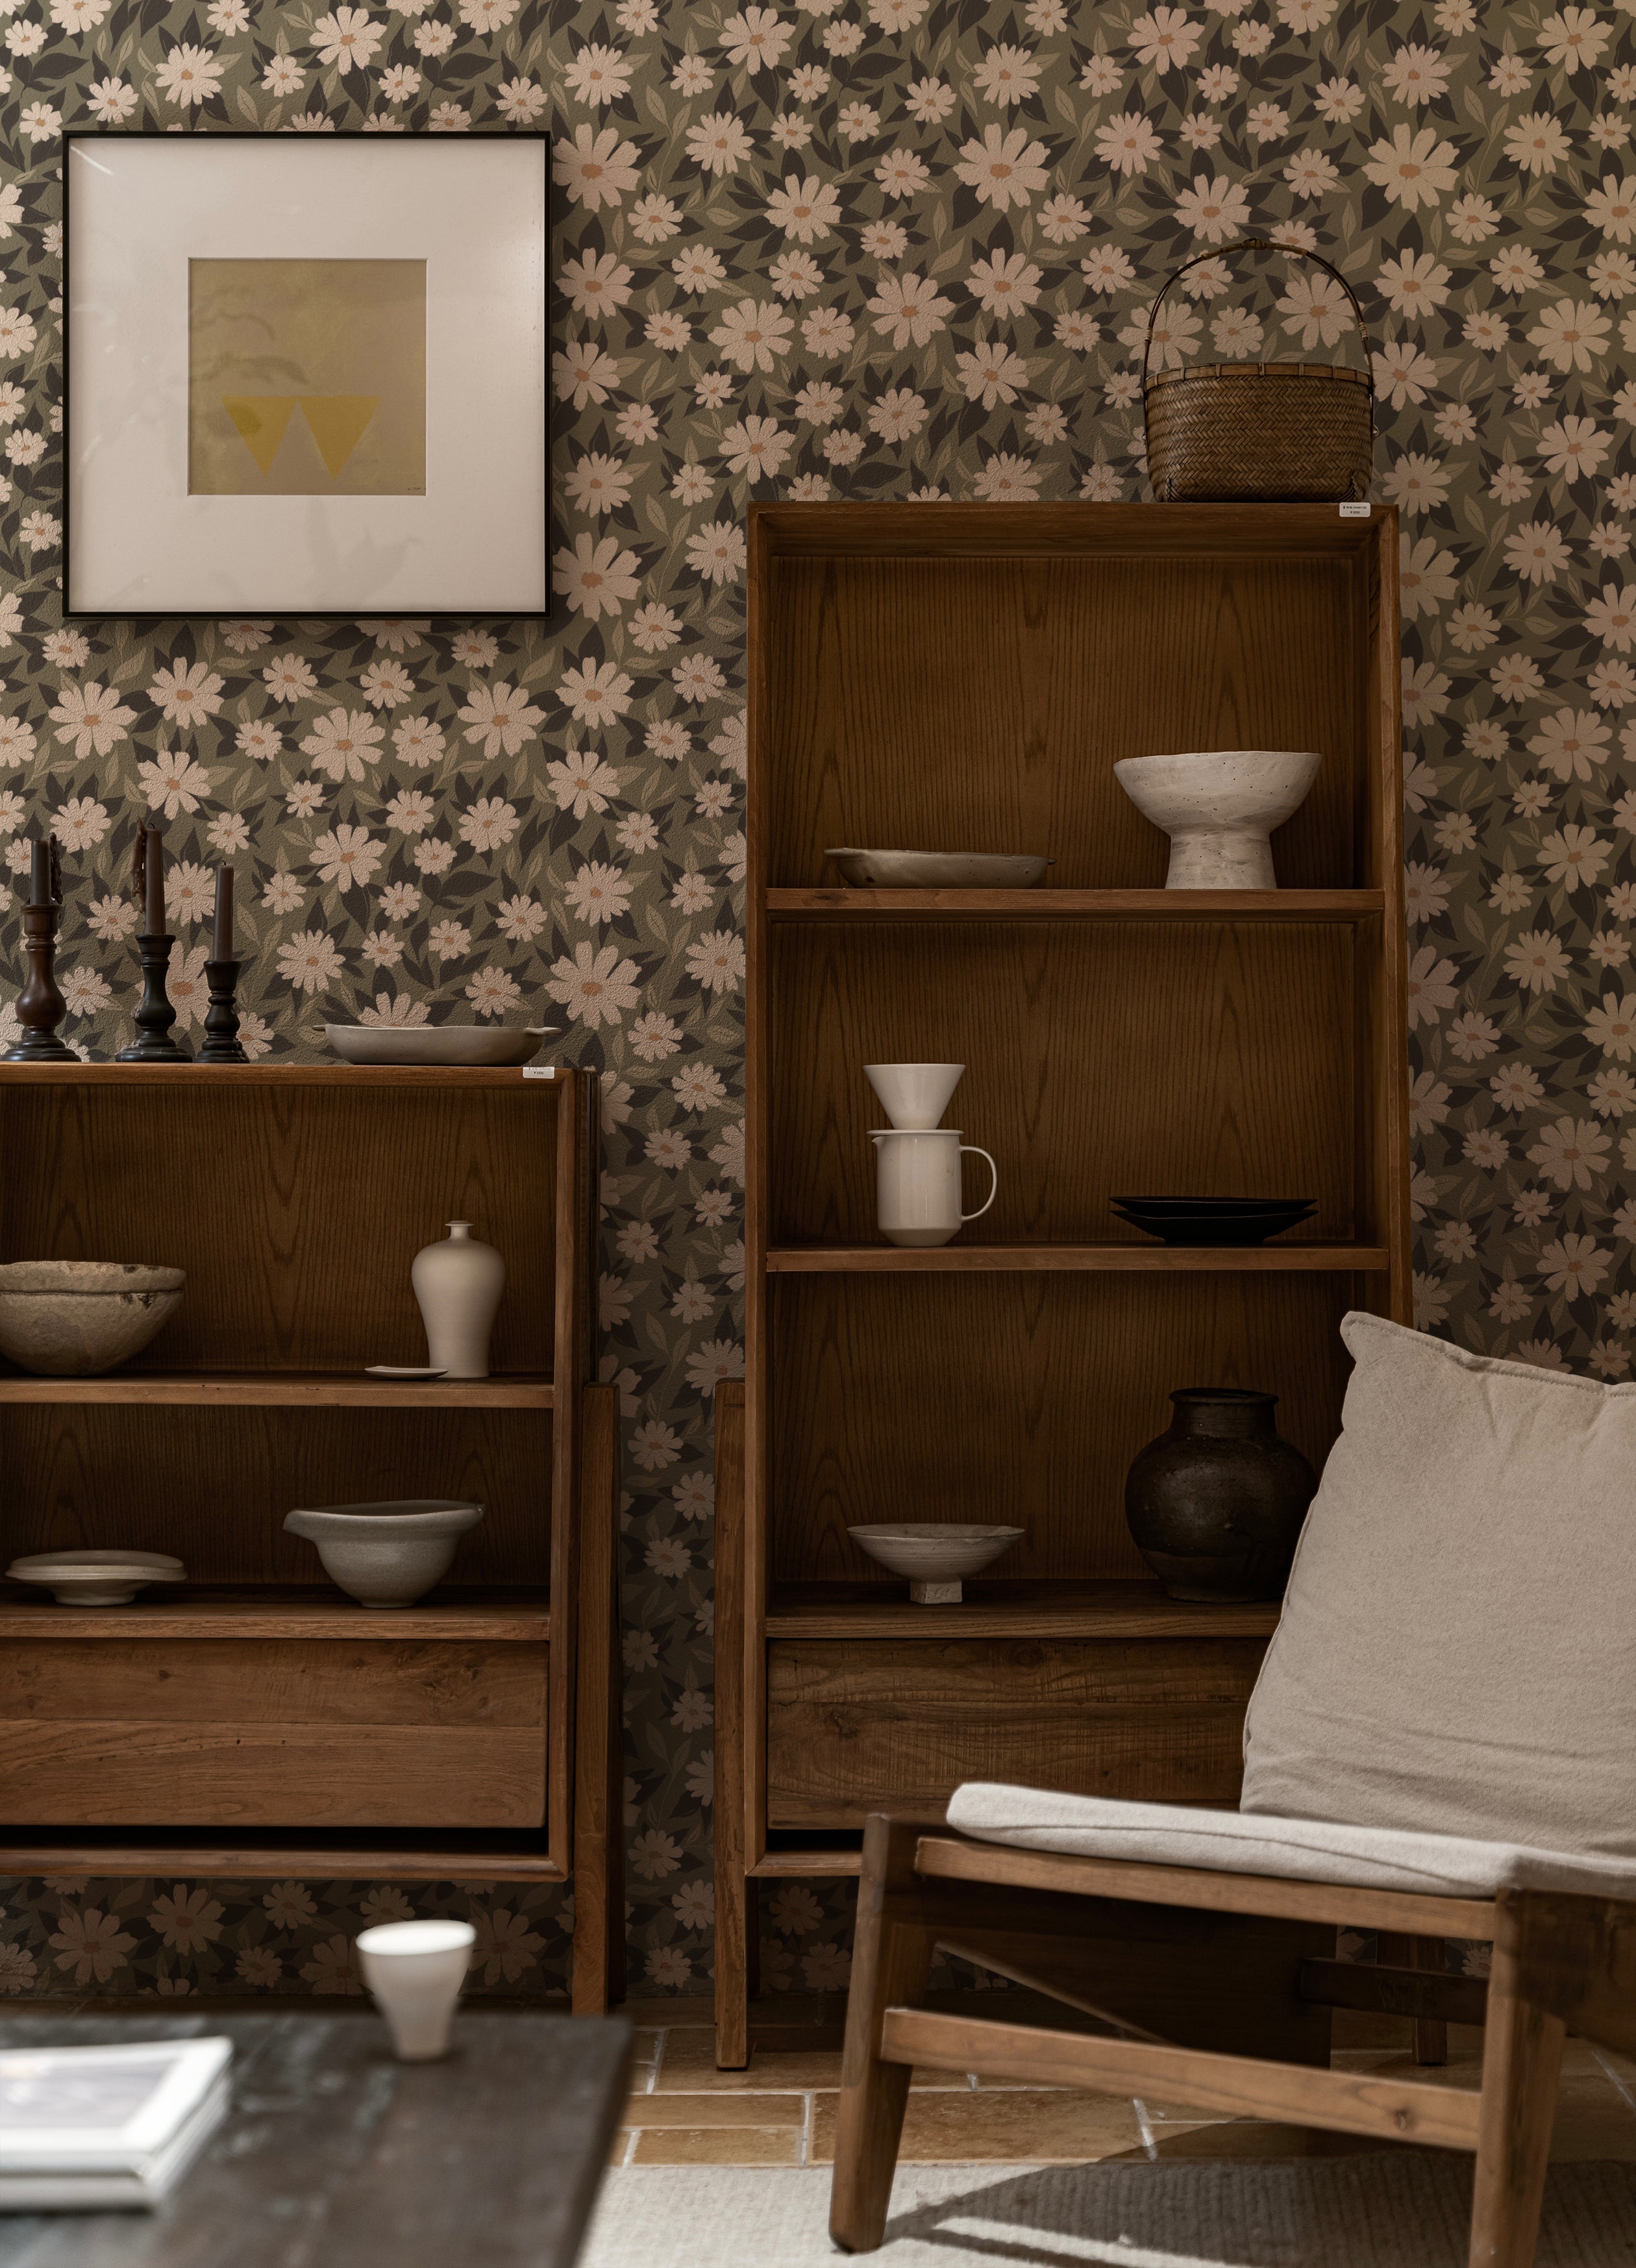 A sophisticated living space showcasing the "Daisy Blooms Wallpaper - 25"" on the walls, complemented by a wooden shelving unit displaying various pottery pieces. The naturalistic floral print enhances the room's rustic charm and creates a calming, elegant environment.